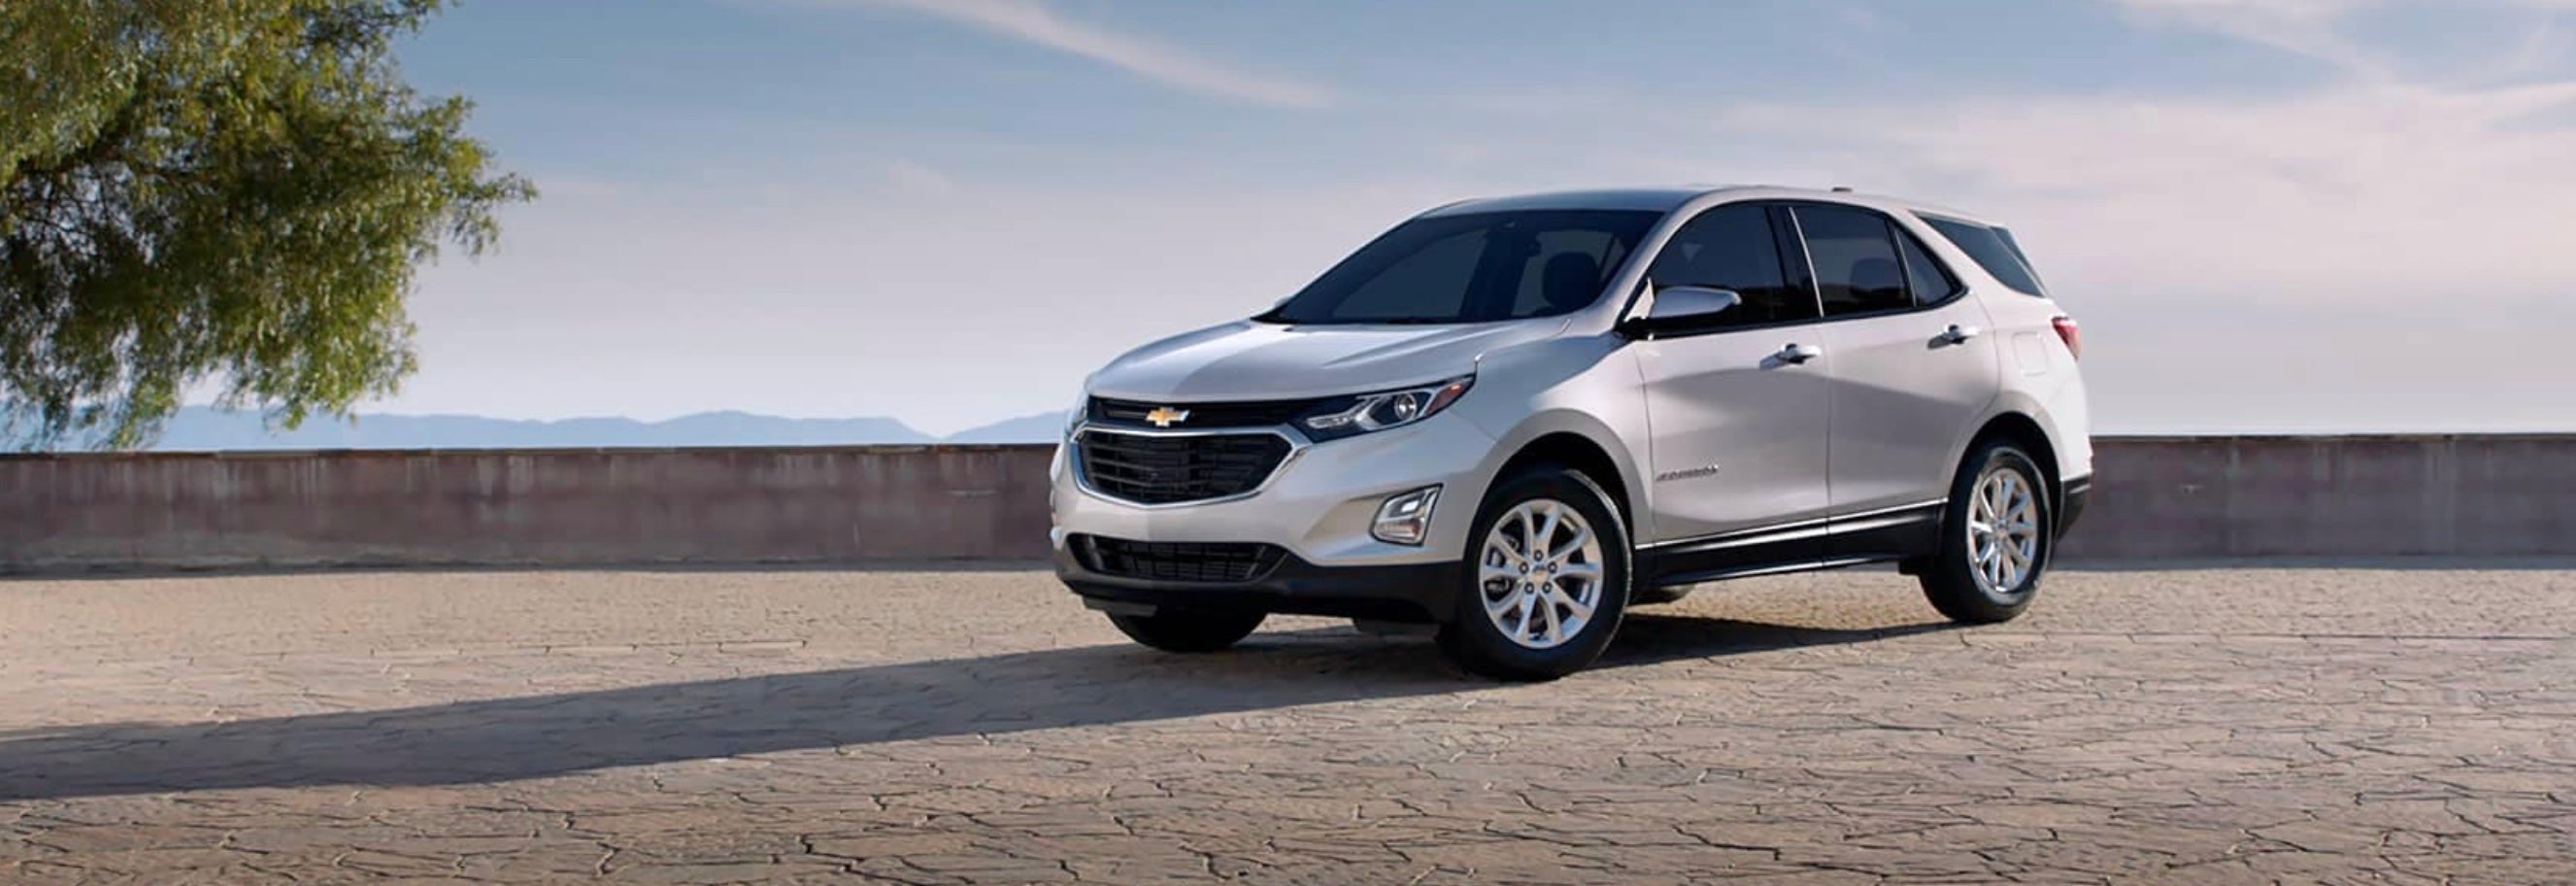 Chevy lease deals